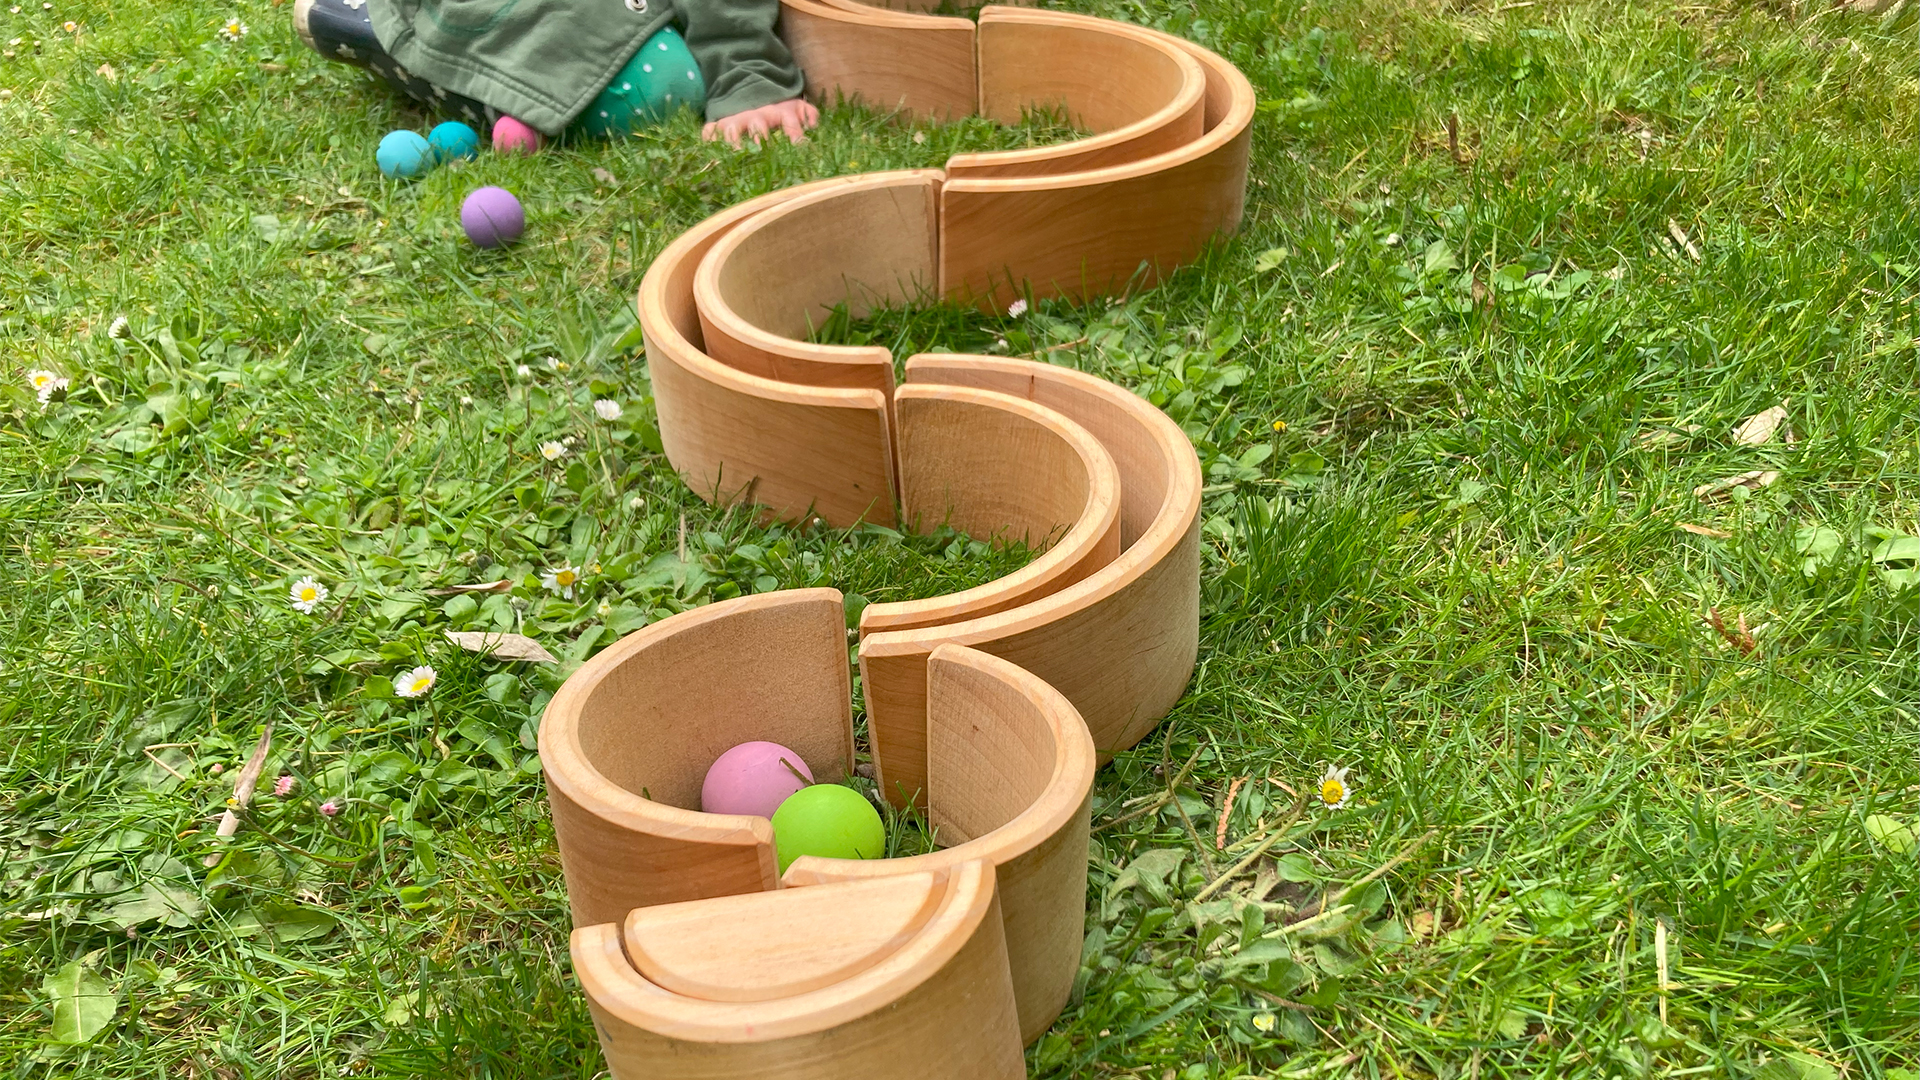 A ball run made of wooden toys stands in the meadow and a child plays with it.